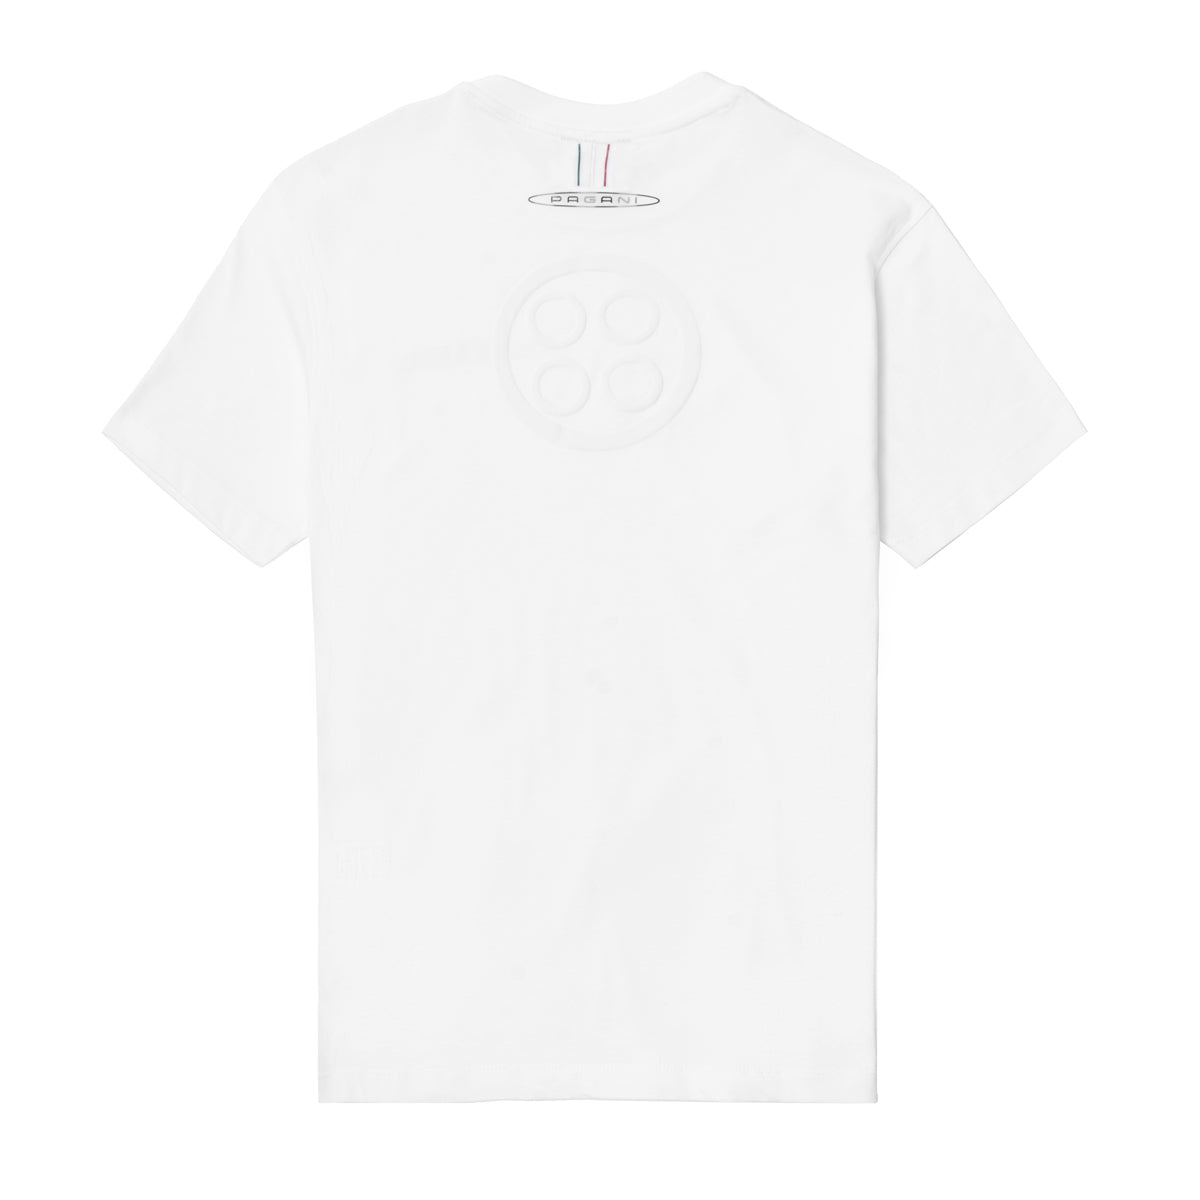 T-shirt uomo logo laterale bianca | Team Collection